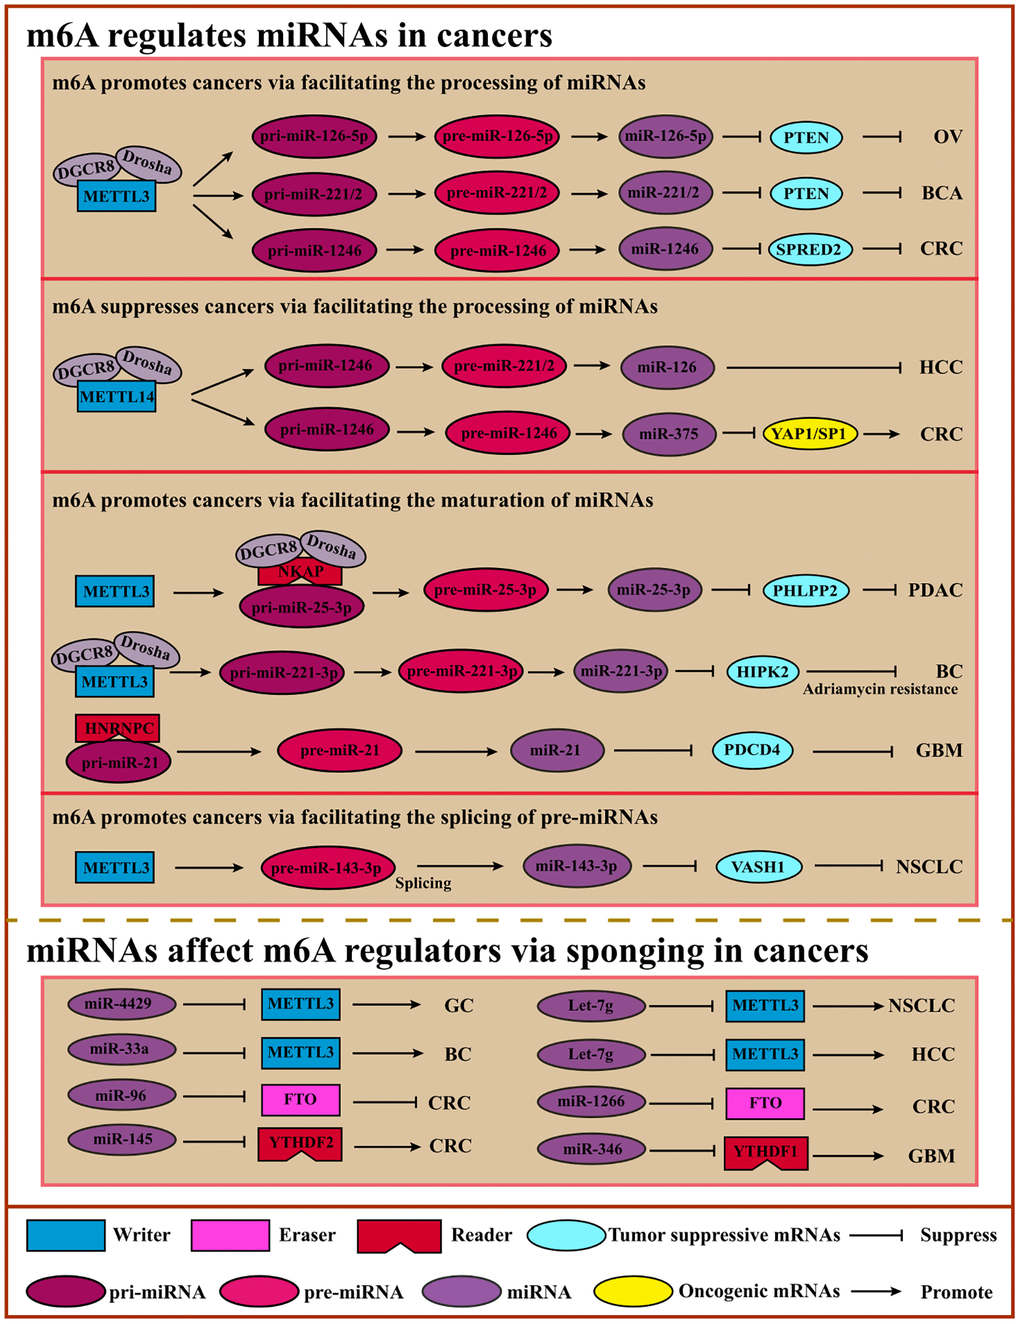 Crosstalk of m6A and miRNAs. m6A can modulate miRNA processing, maturating, or pre-miRNA splicing via “Writers” or “Readers” to inhibit or promote cancers. miRNAs regulate m6A regulators by sponging to affect m6A modification, suppressing or promoting cancers. Abbreviations: OV: ovarian cancer; BCA: bladder cancer; CRC: colorectal cancer; HCC: hepatocellular cancer; PDAC: pancreatic ductal adenocarcinoma; BC: breast cancer; GBM: glioblastoma; NSCLC: non-small cell lung cancer.